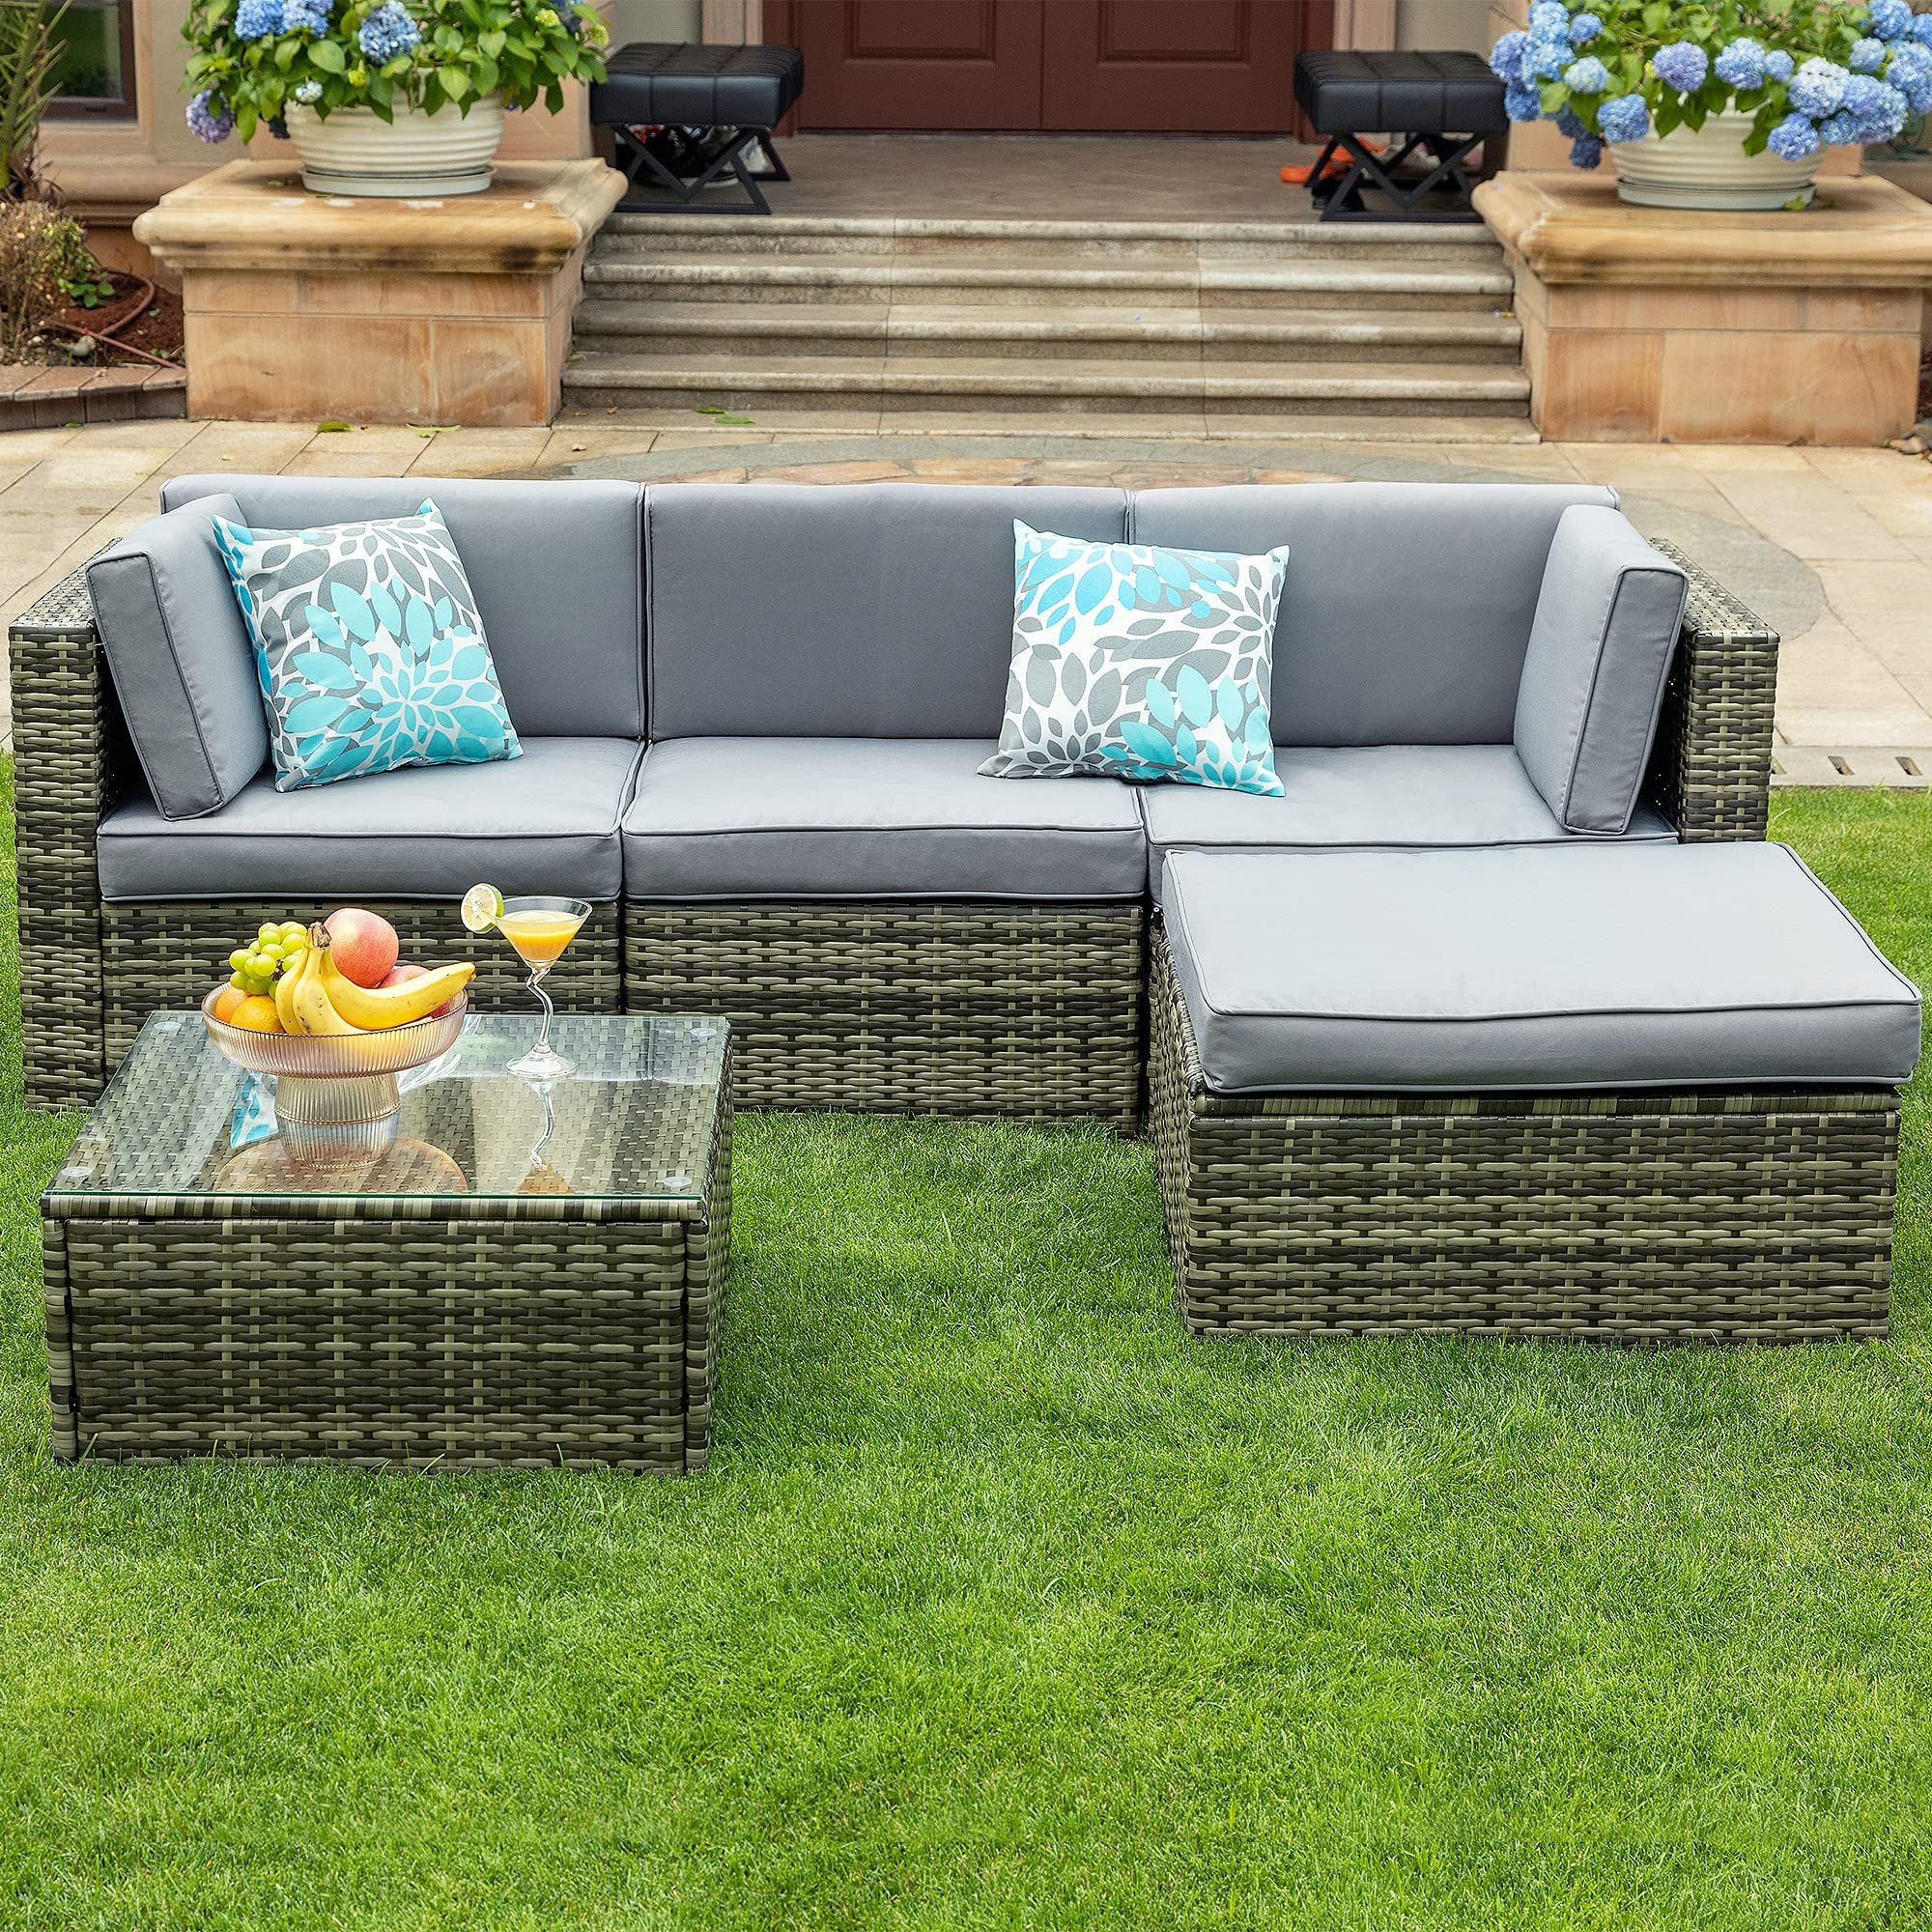 5 Piece Outdoor Patio Furniture Set Regarding Most Recently Released Amazon: Yitahome 5 Piece Outdoor Patio Furniture Sets, All Weather  Wicker Sectional Sofa Patio Conversation Set With Ottoman, Coffee Table And  Cushions, Gray Gradient : Patio, Lawn & Garden (View 12 of 15)